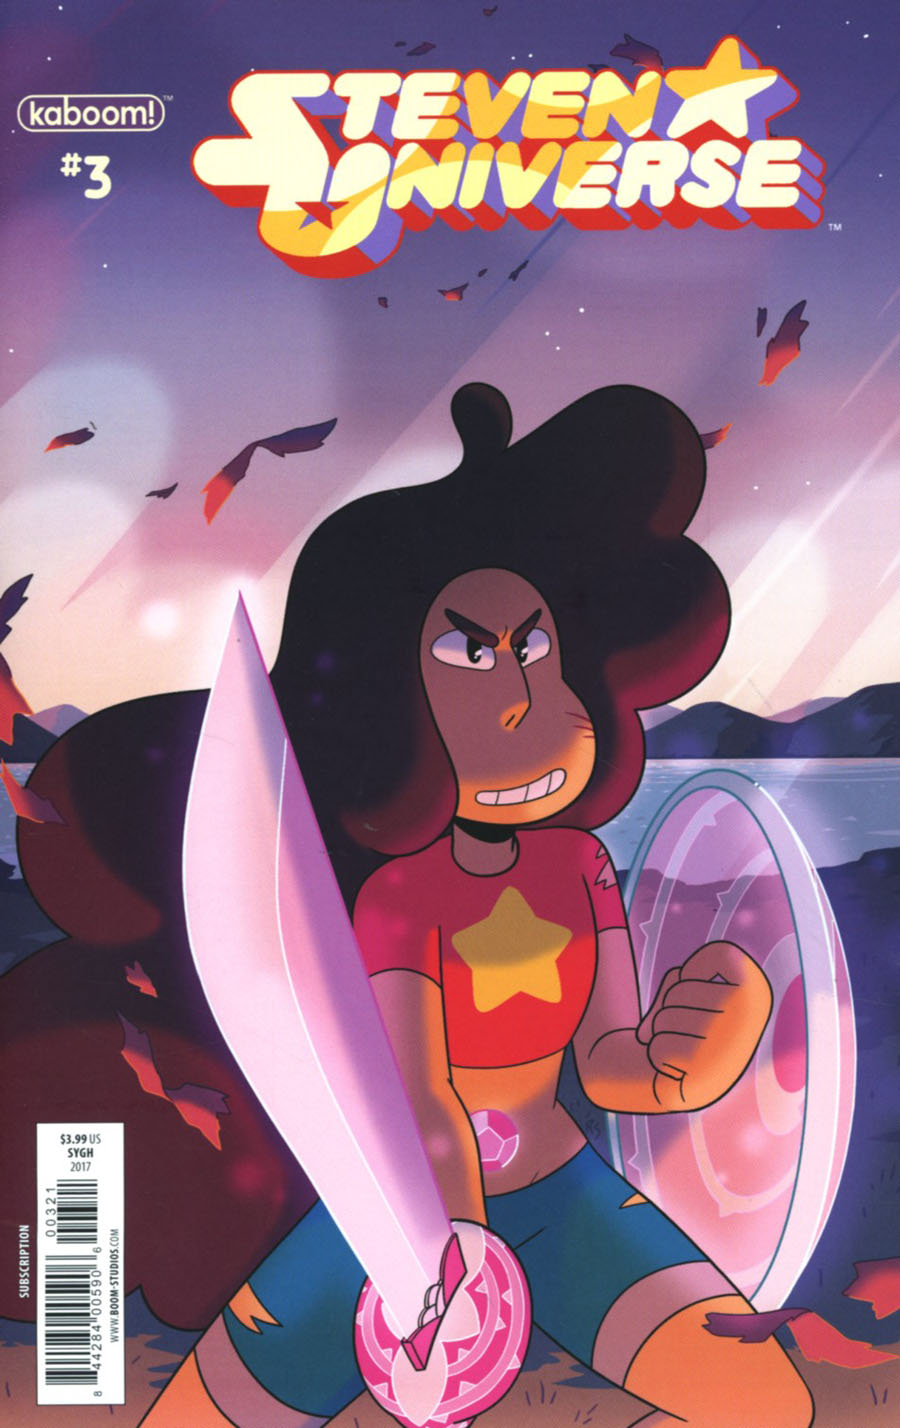 Steven Universe Vol 2 #3 Cover B Variant Rian Sygh Subscription Cover